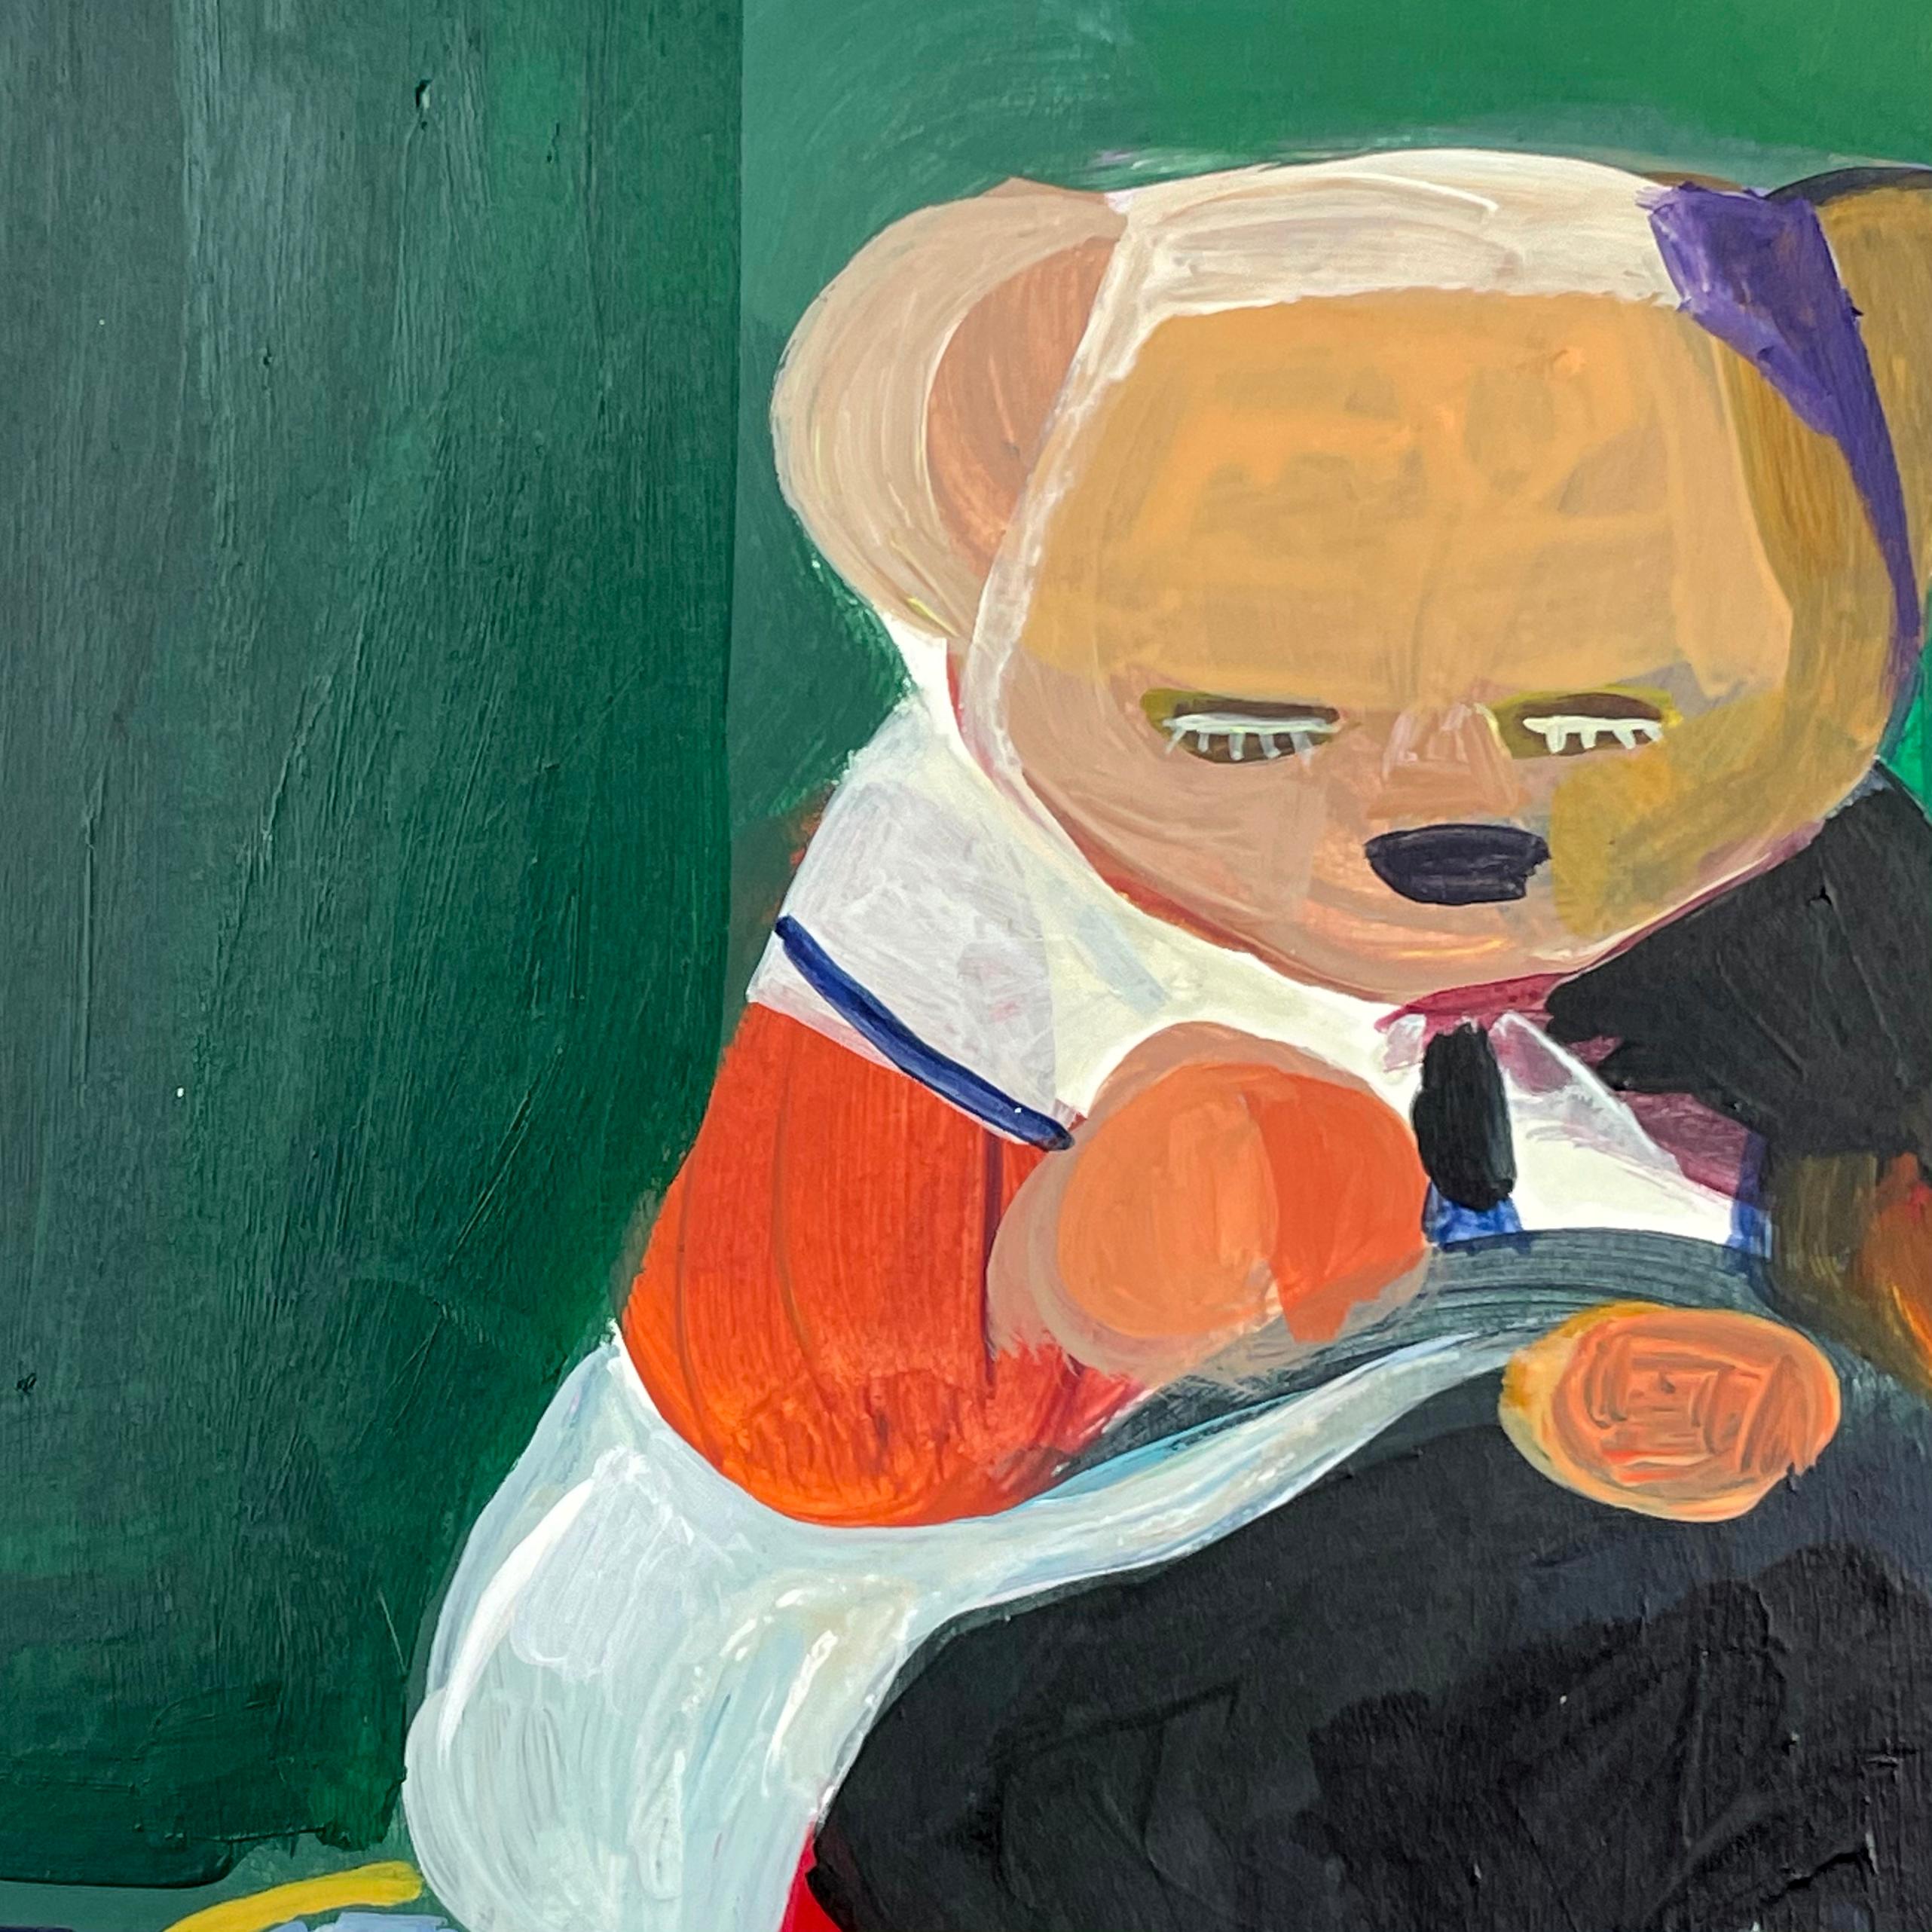 <p>Artist Comments<br />A teddy bear sits quietly, busy sewing in peace. In its lap lays a black, red, and white cloth draping all the way down to a bucket. Artist Ziui Vance's work commonly reflects on everyday life scenes, encompassing a wide